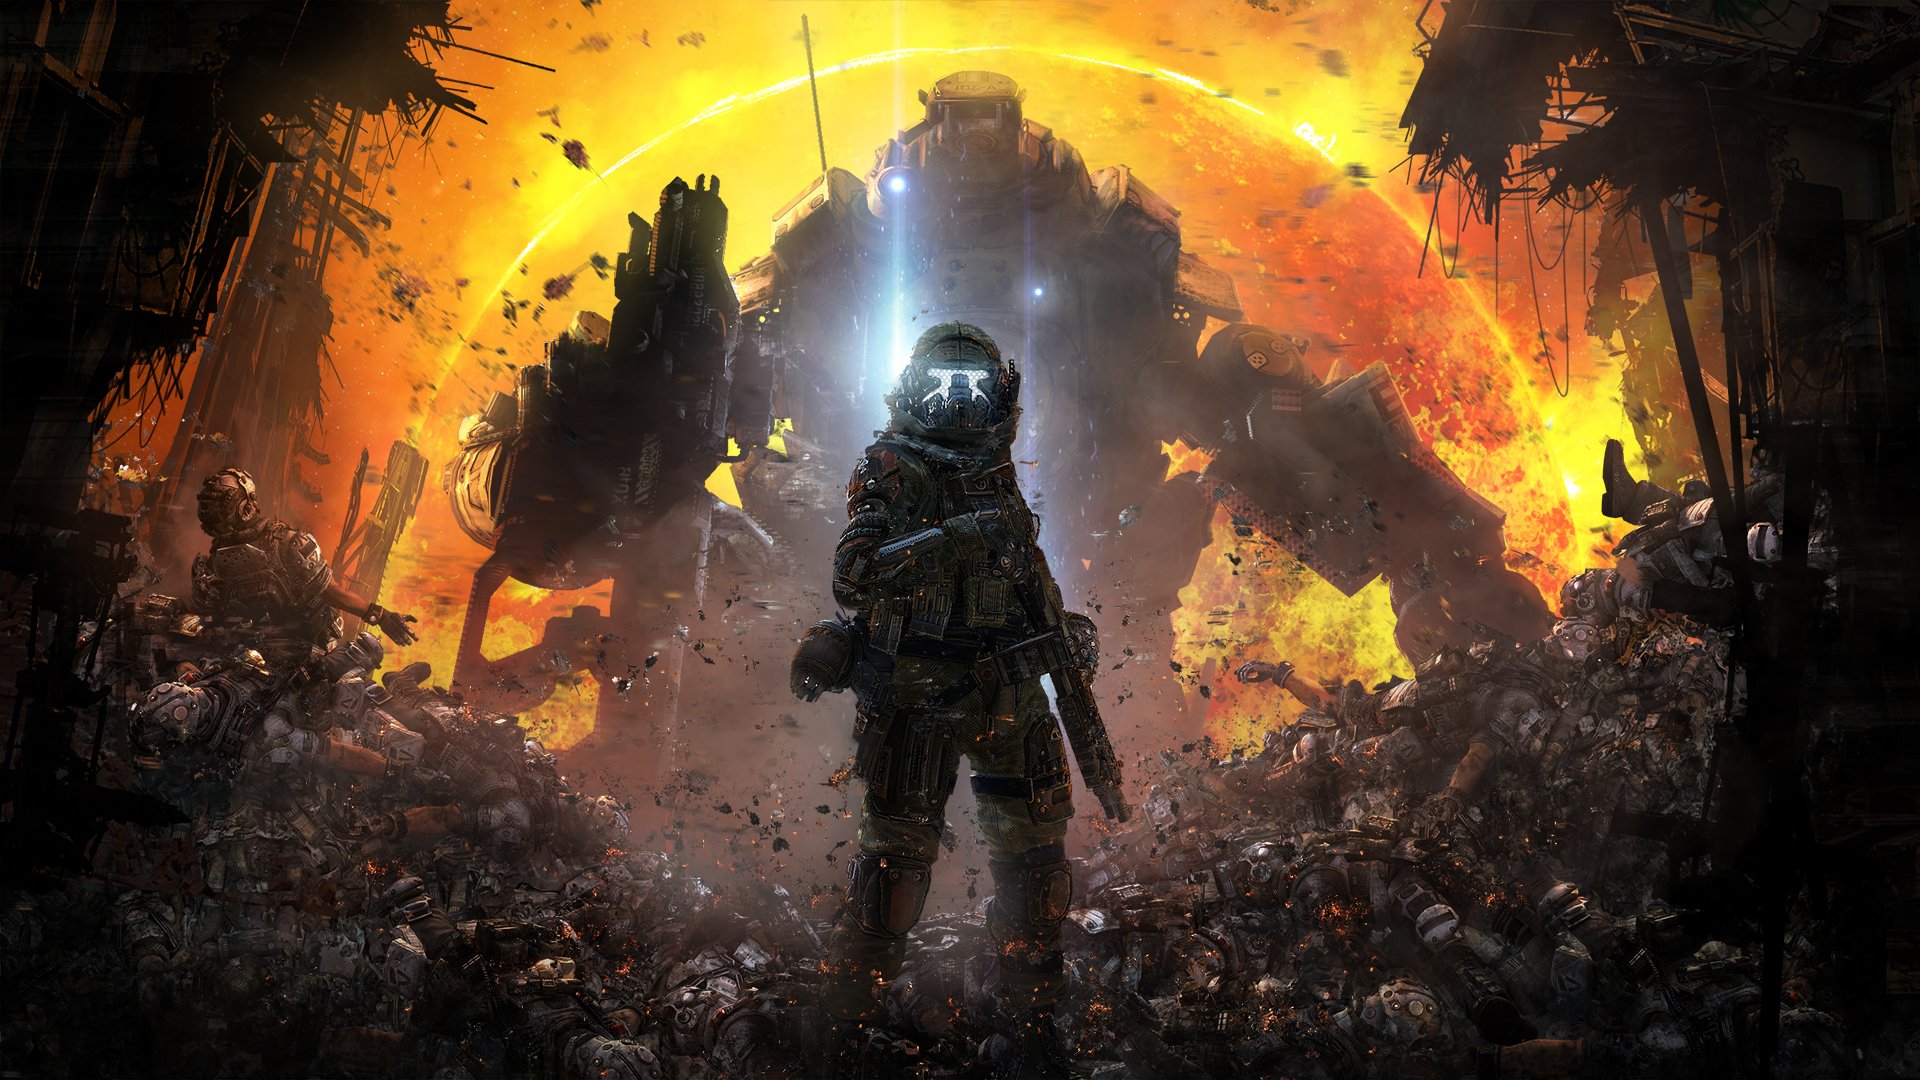 71 Titanfall Hd Wallpapers Background Images Wallpaper Abyss